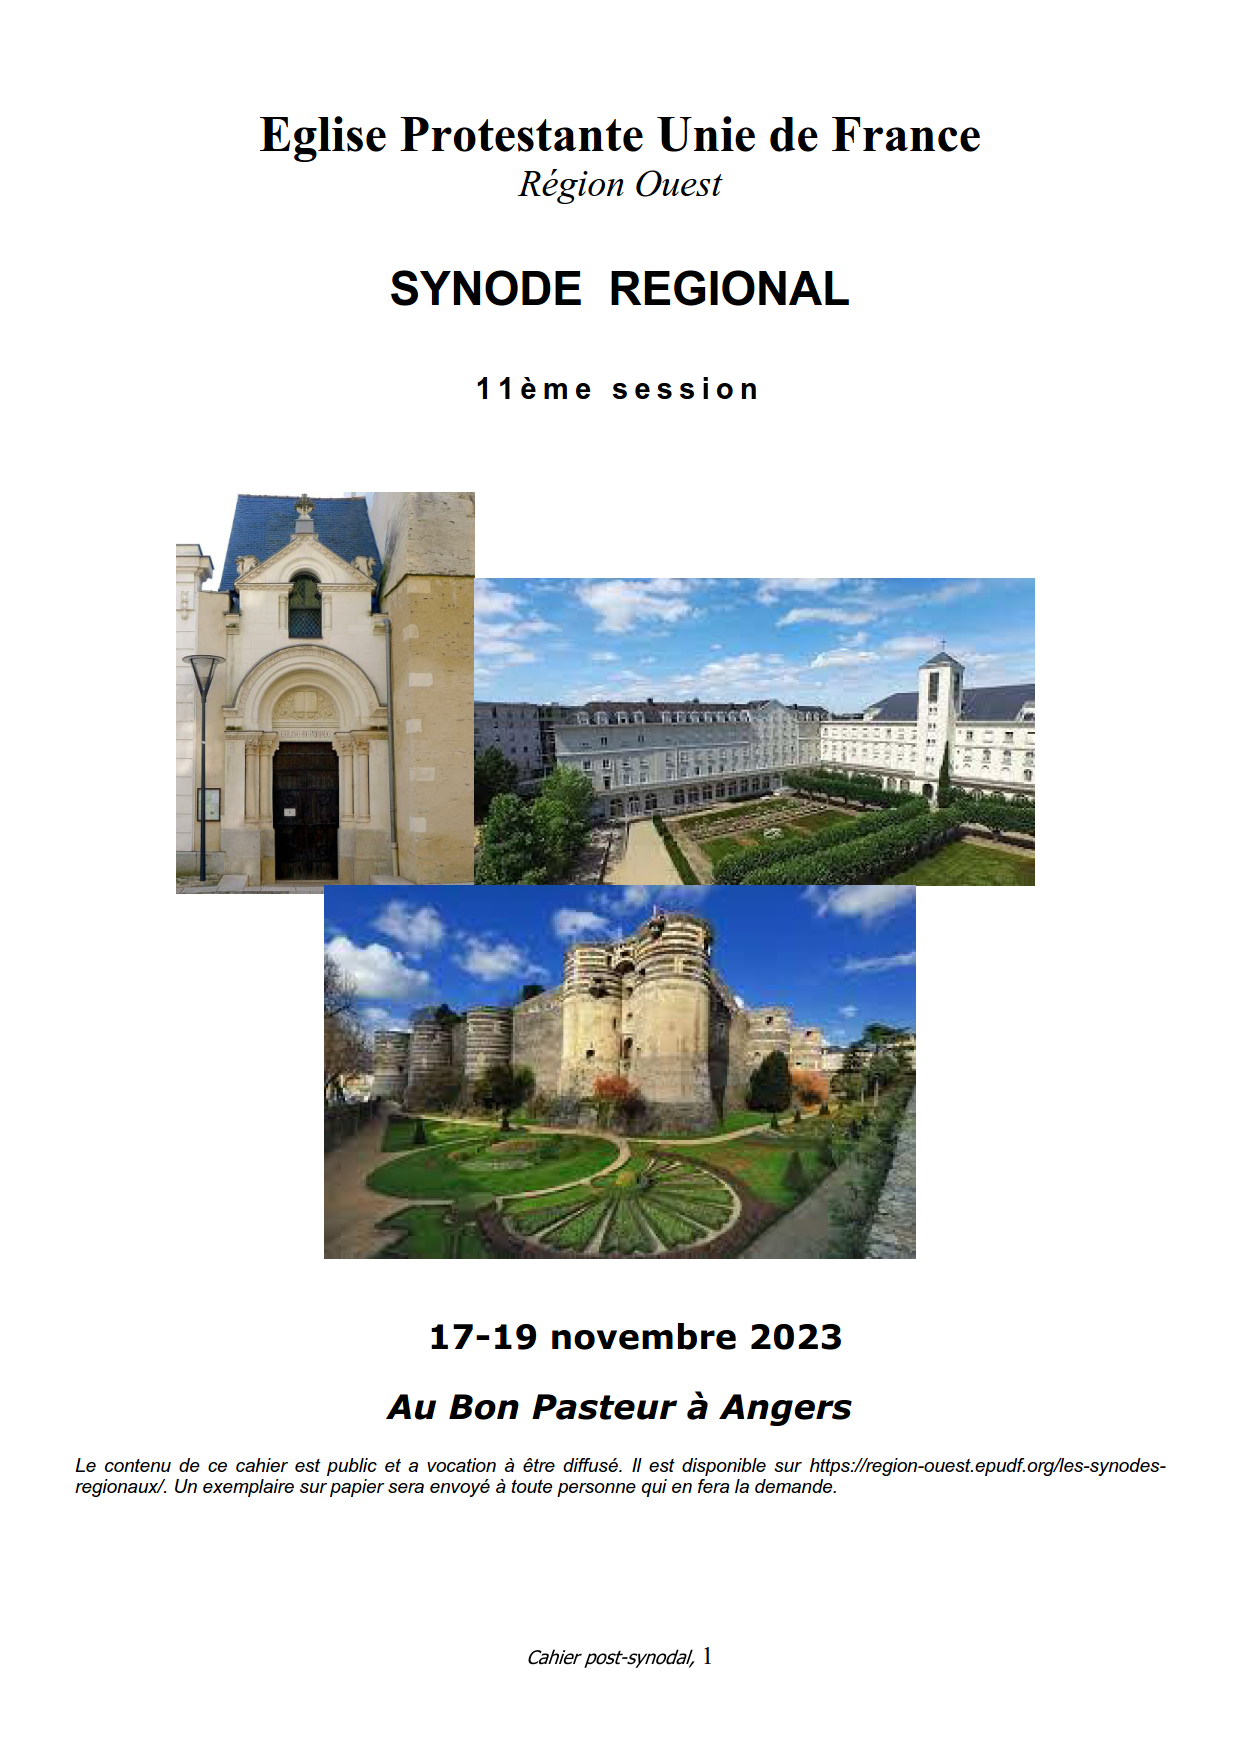 https://region-ouest.epudf.org/wp-content/uploads/sites/9/2023/11/cahier-post-synodal-ouest-Angers-2023_1.png